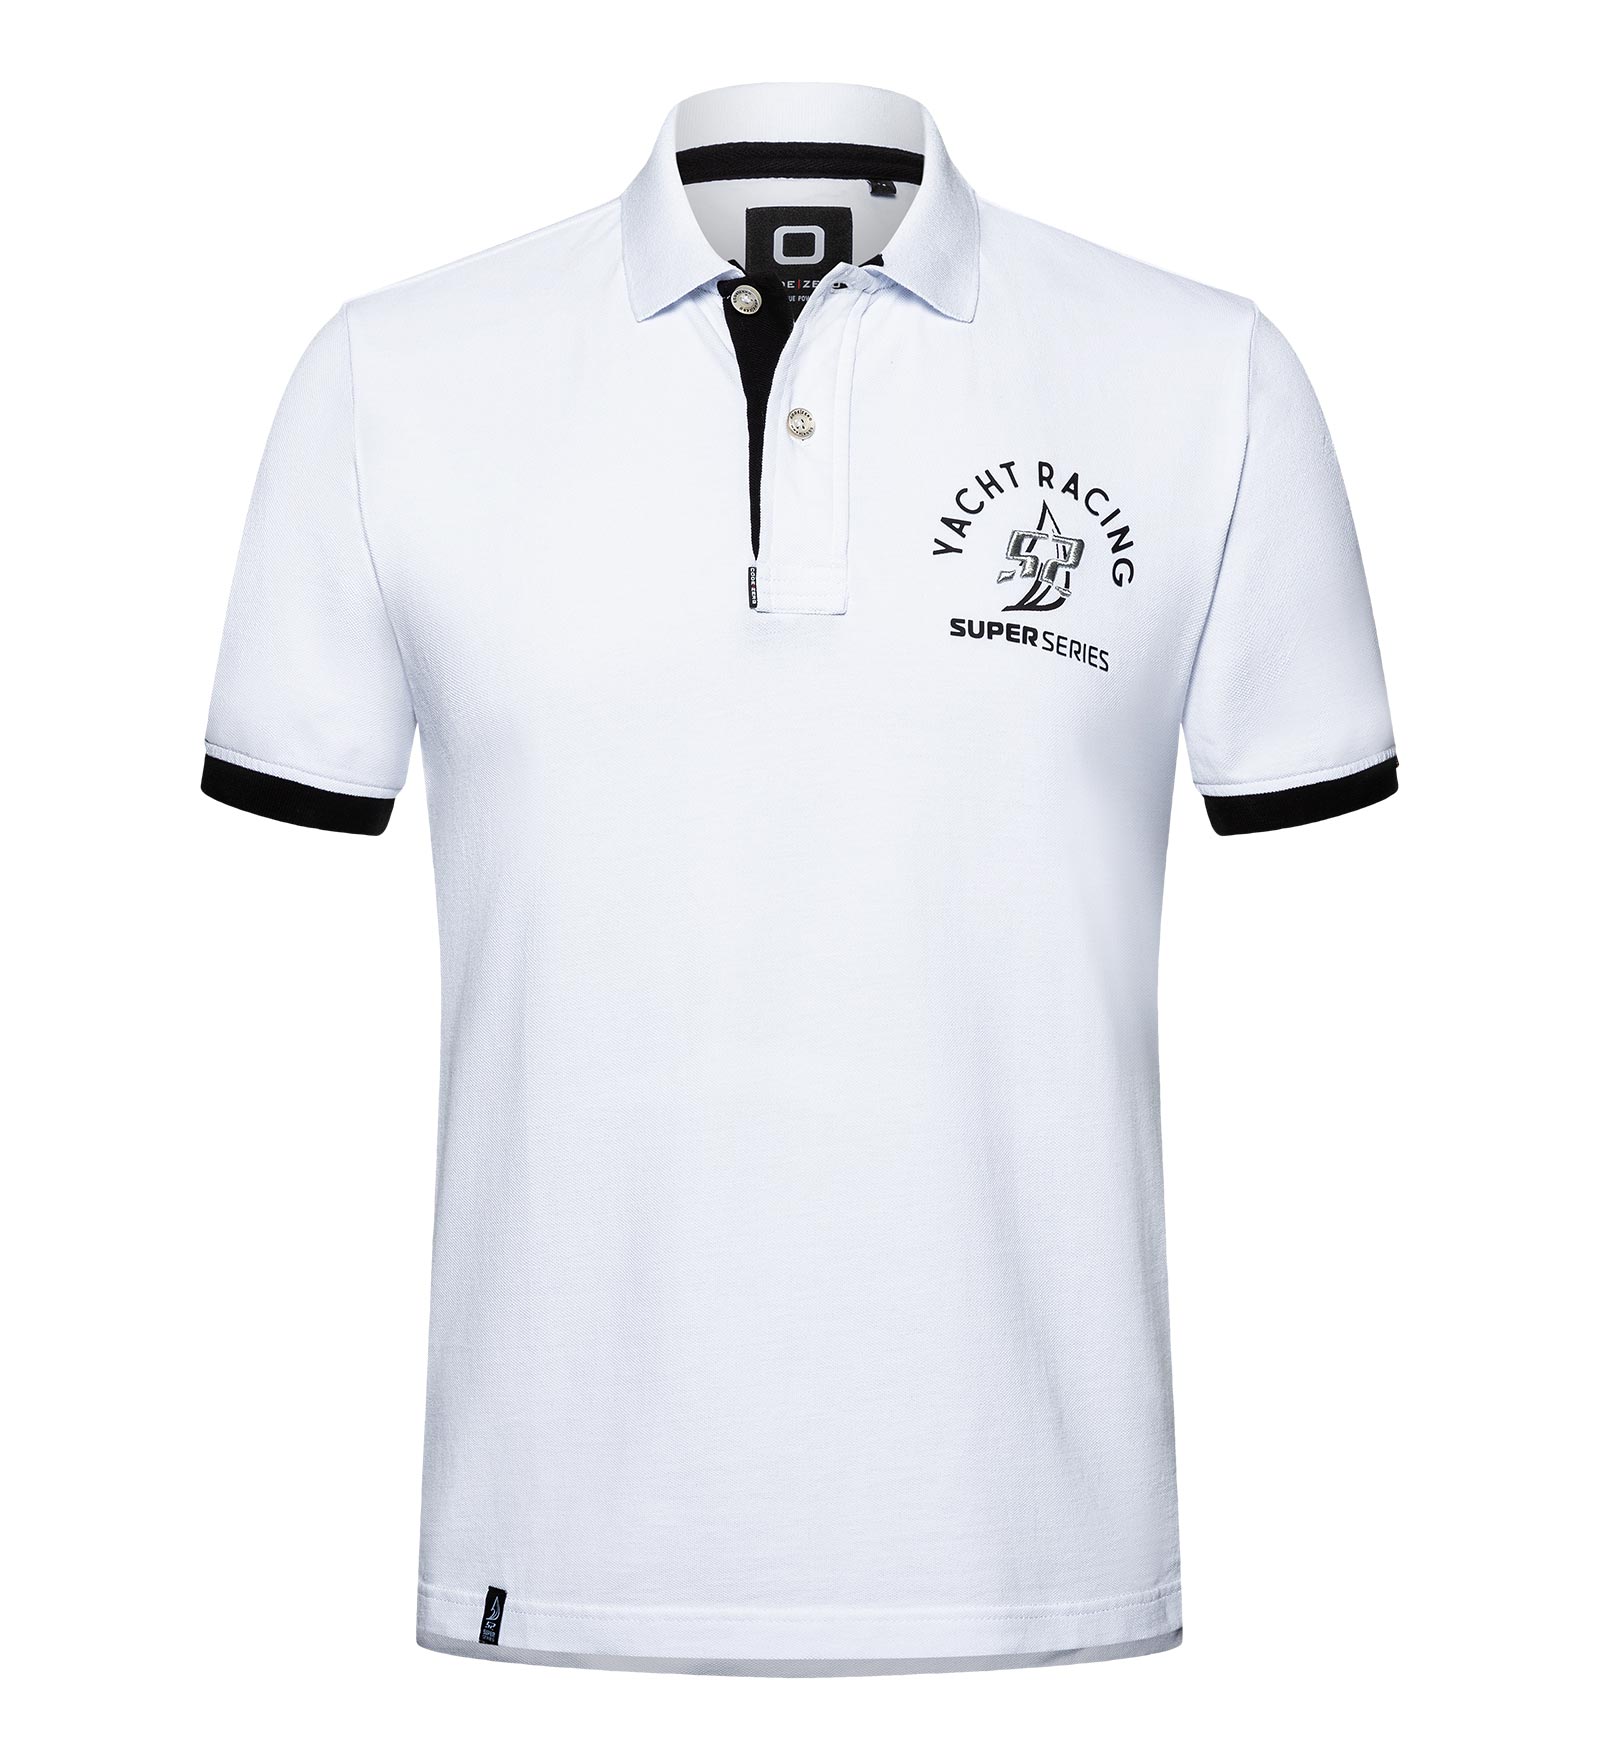 Are Polo Shirts Ideal for Retailers?